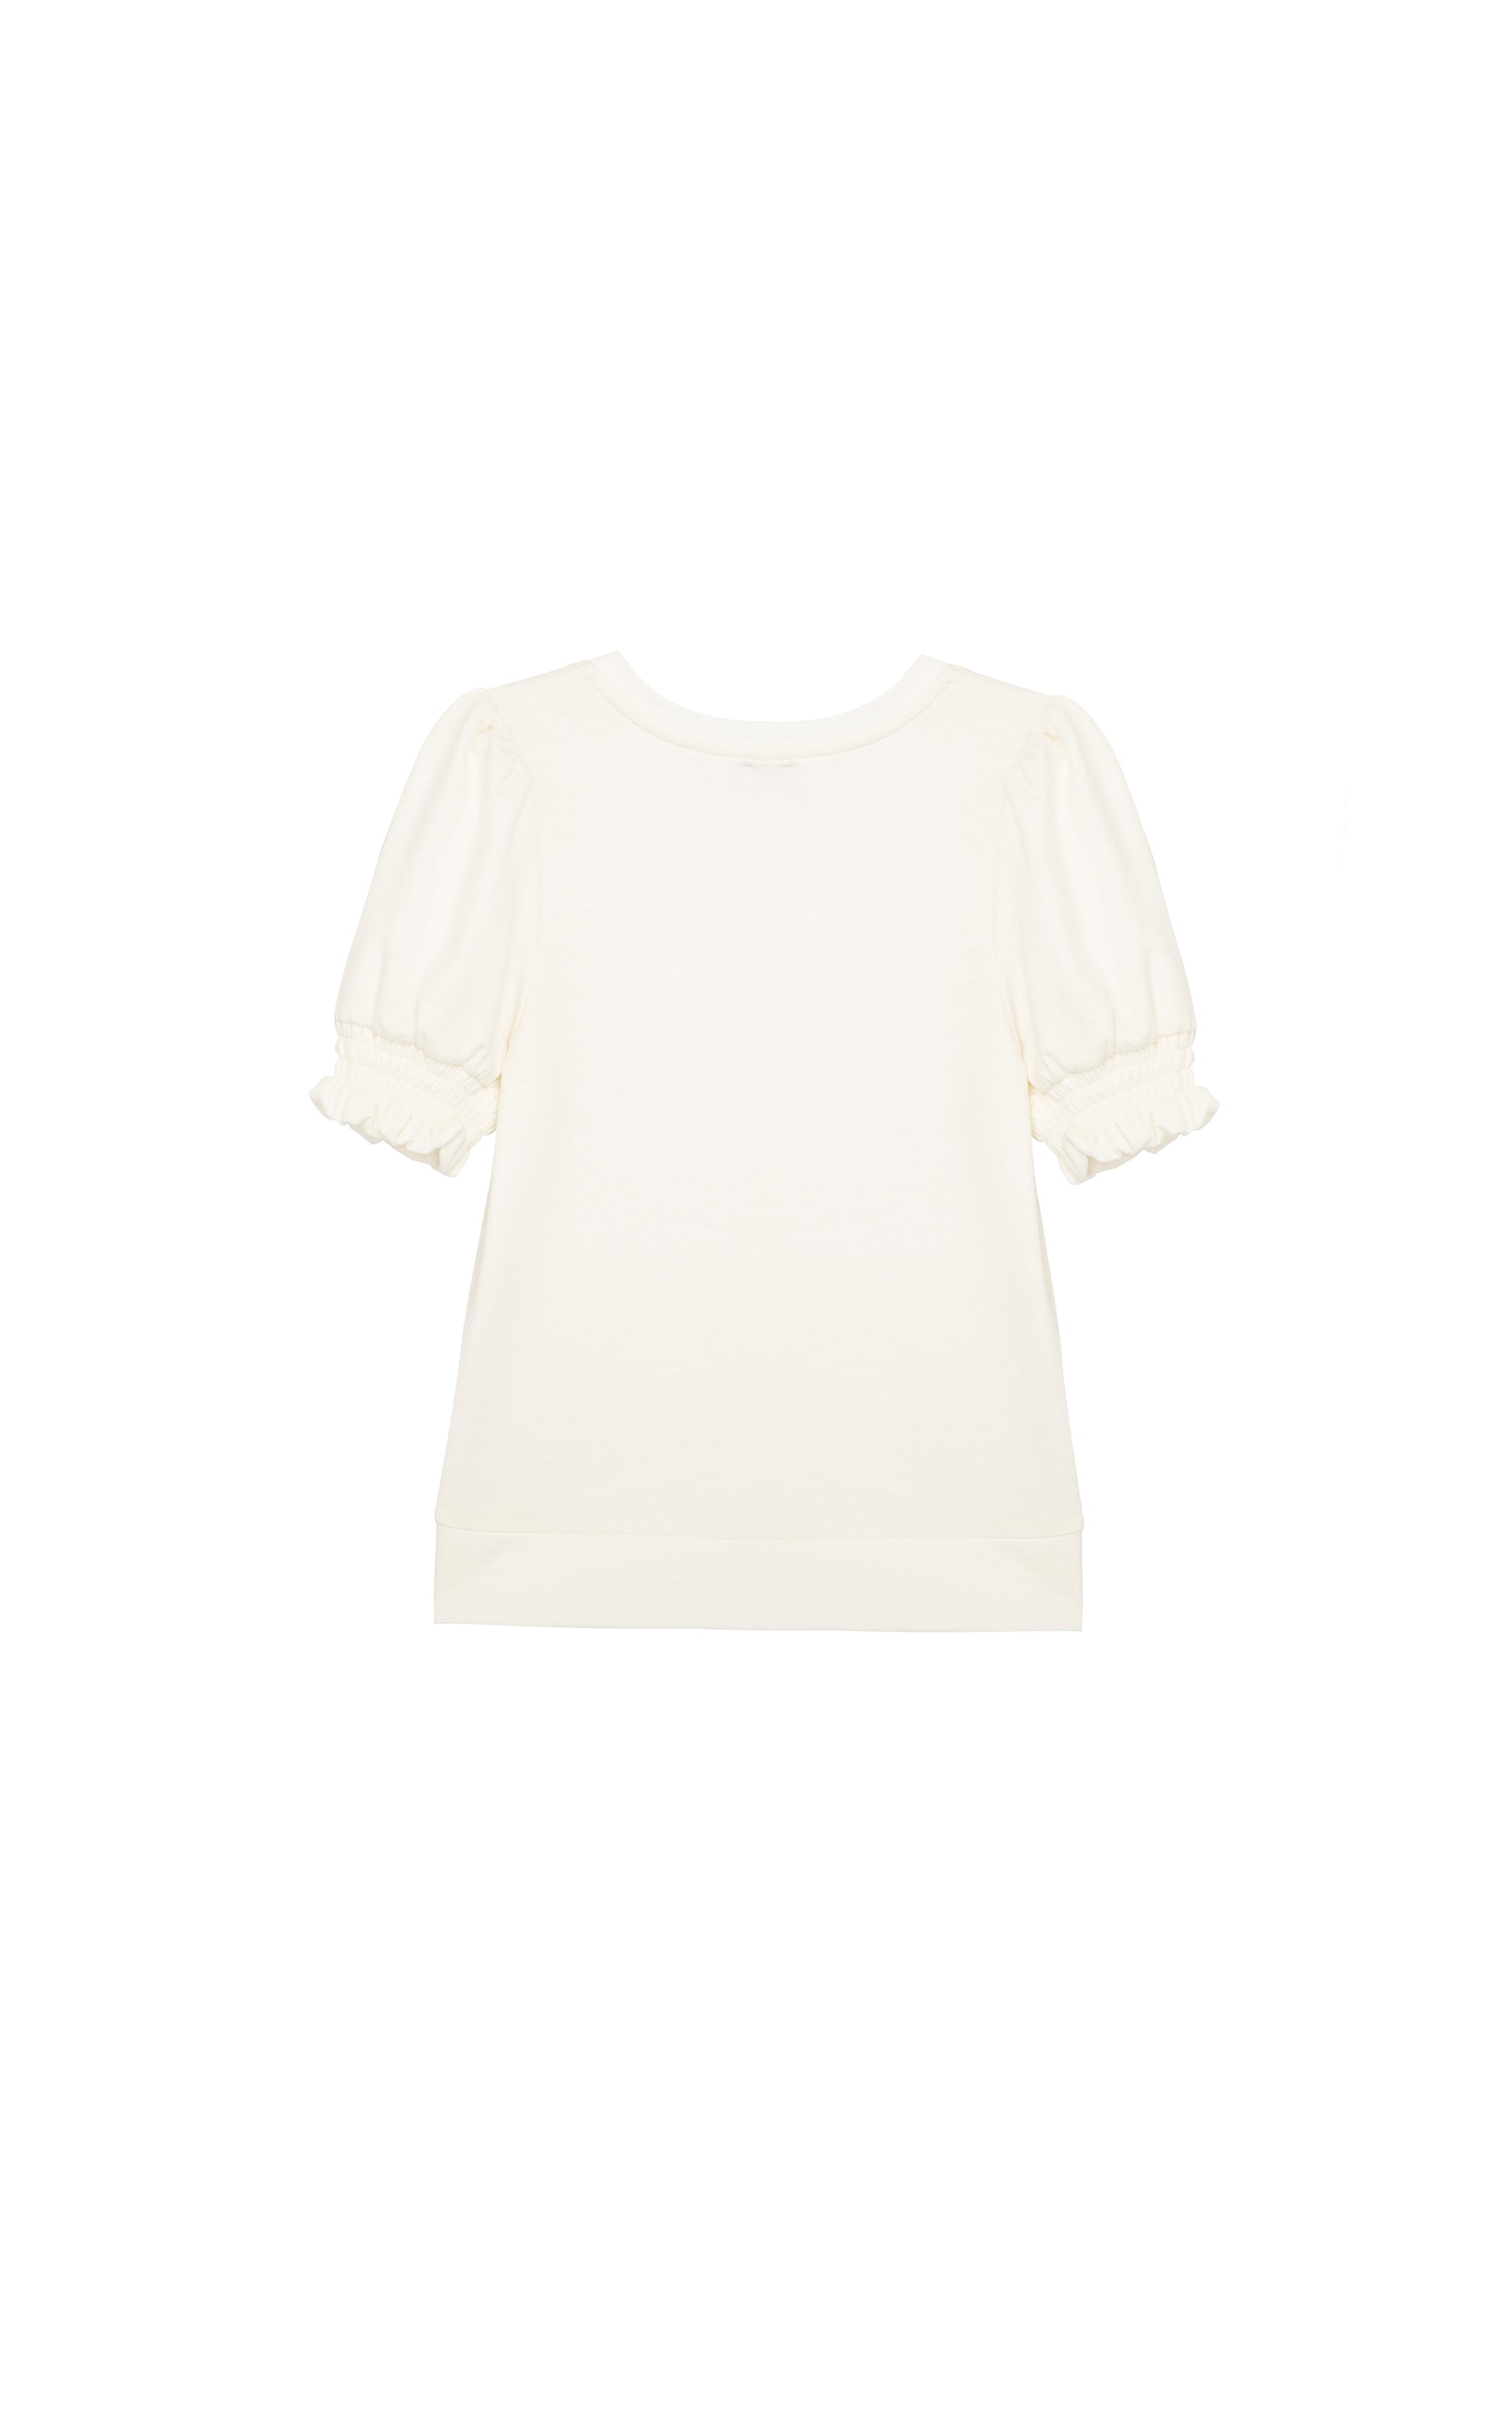 BACK OF WHITE SHORT SLEEVE KNIT TOP WITH PUFFY AND SMOCKED SLEEVES